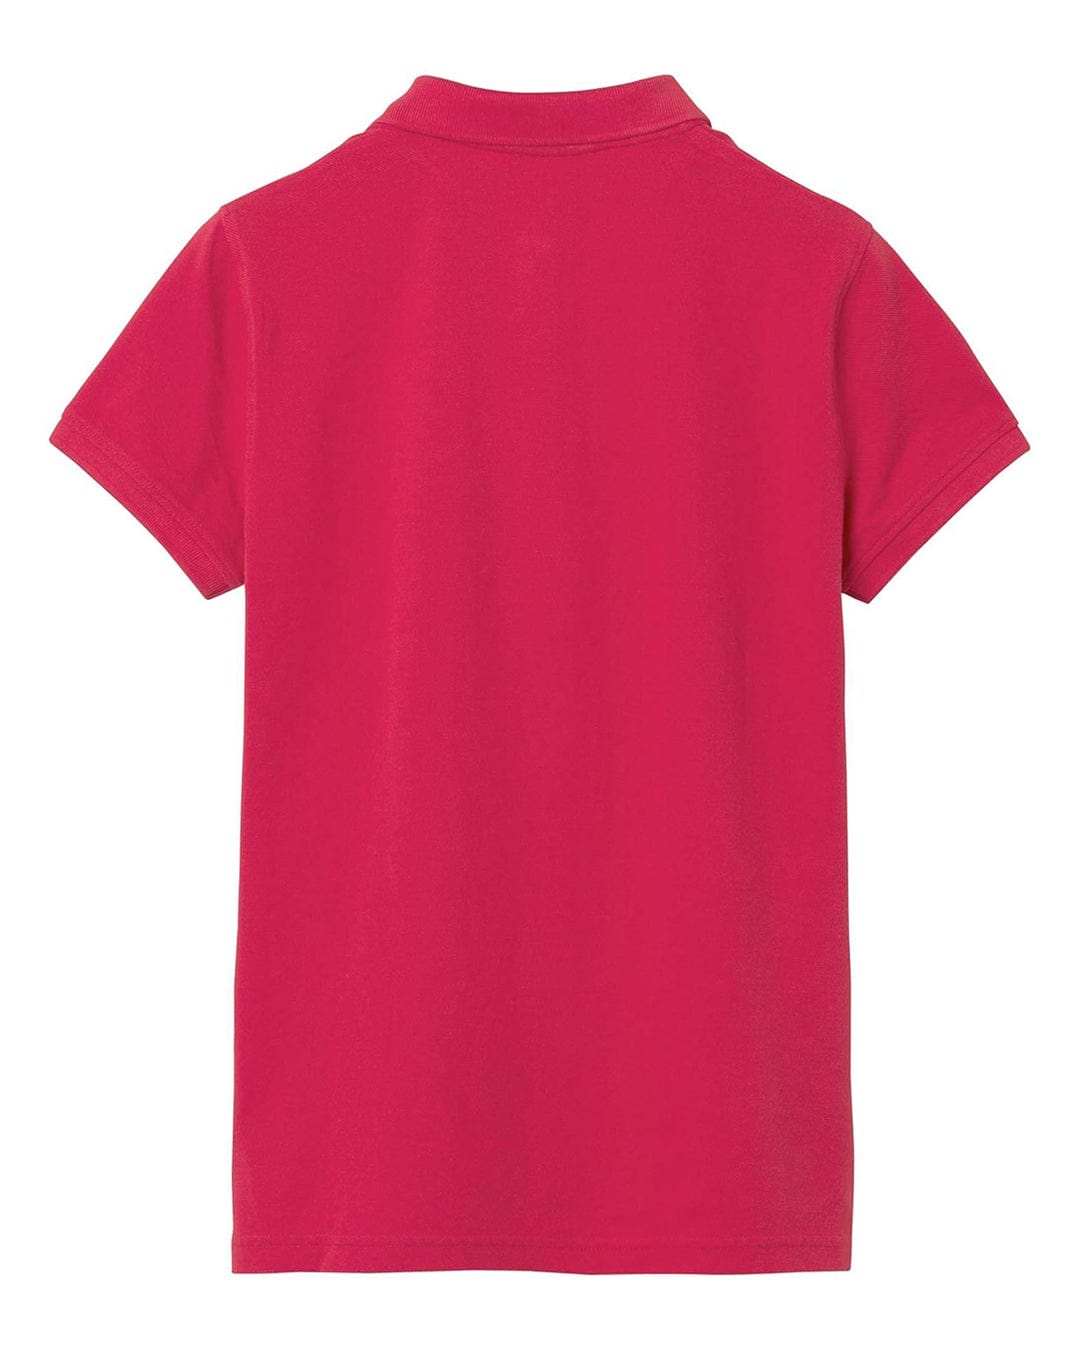 Gant Polo Shirts Gant Pink Short Sleeved Pique Rugby Polo Shirt